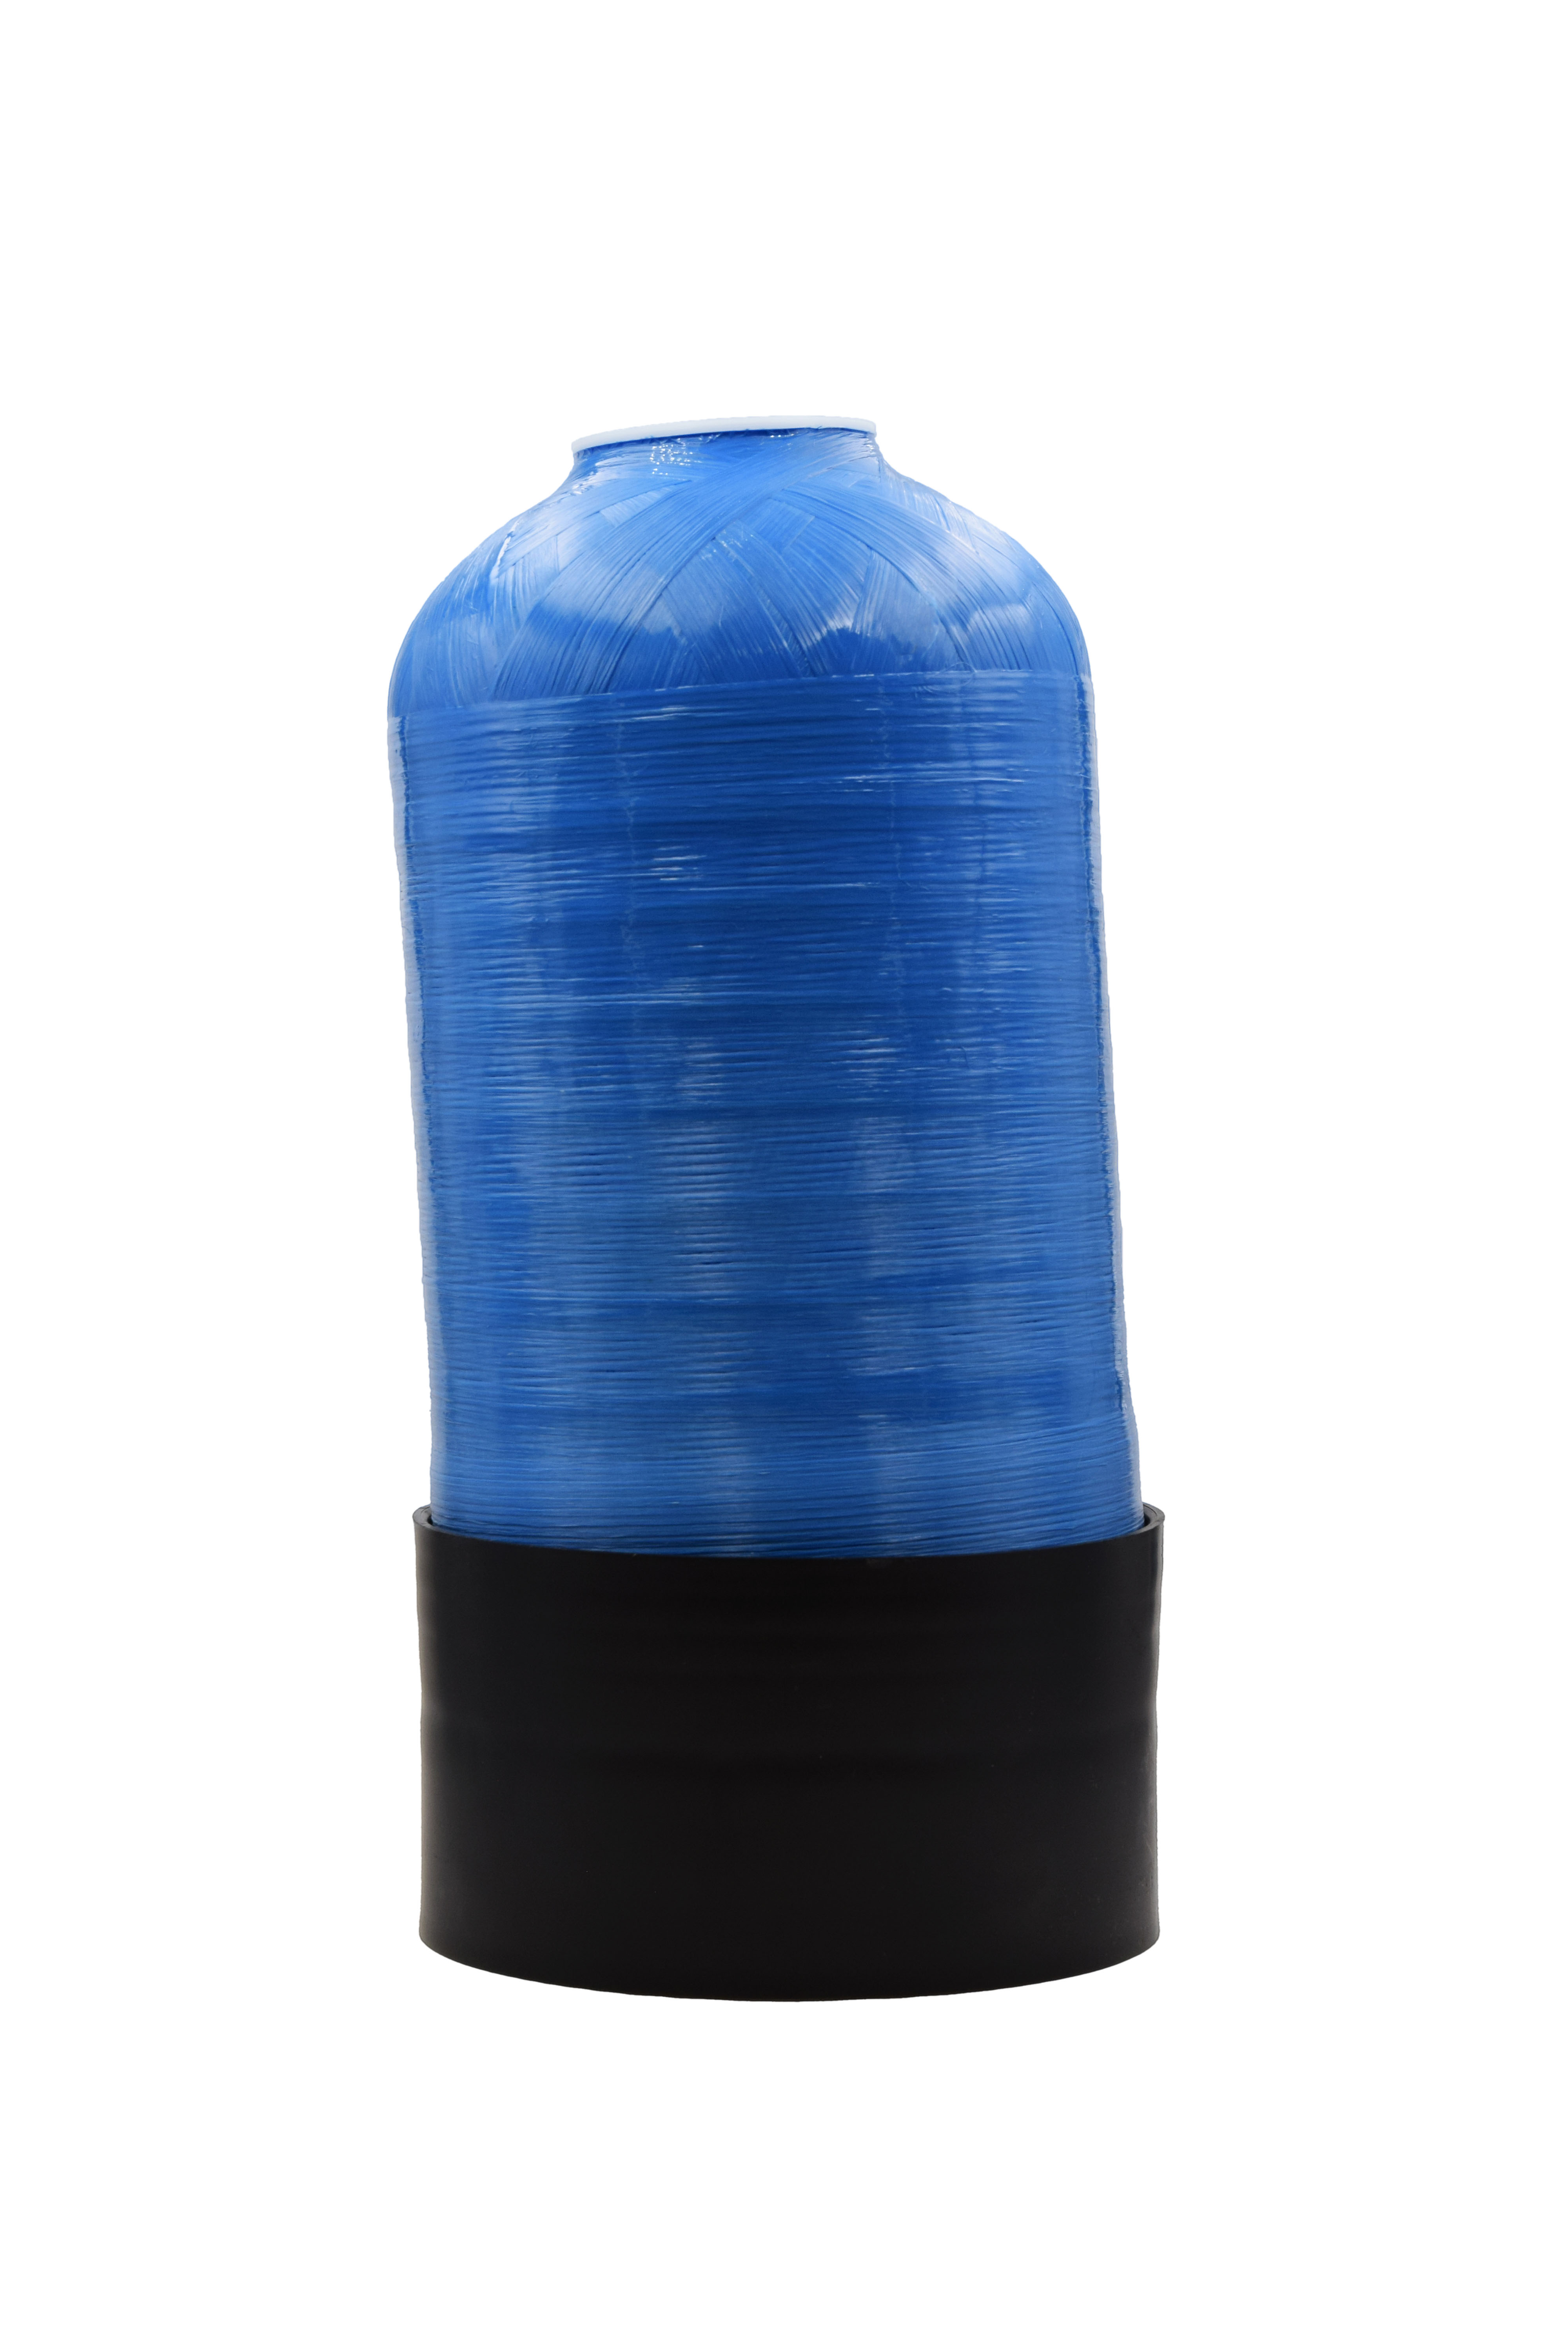 10 Liter Plastic Mixed Bed Demineralization Cartridge Filled with Premium Resin